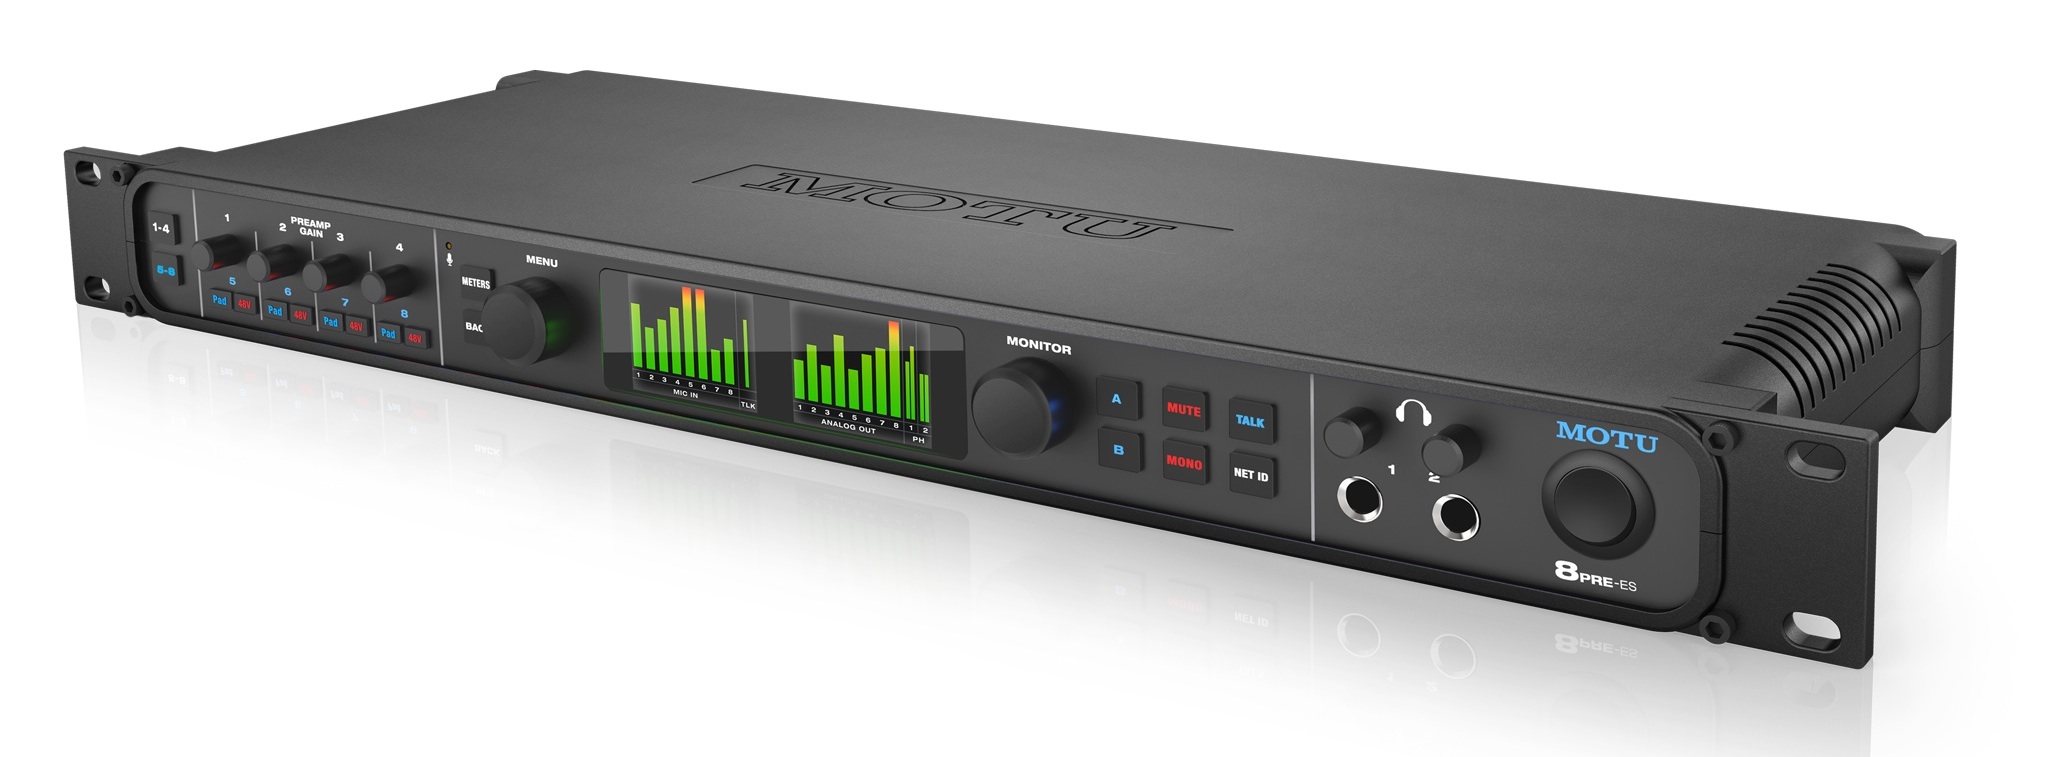 New Gear Alert: MOTU 8pre-es Interface, Soundtoys 5.2.4 Update, MixPre Series by Sound Devices & More